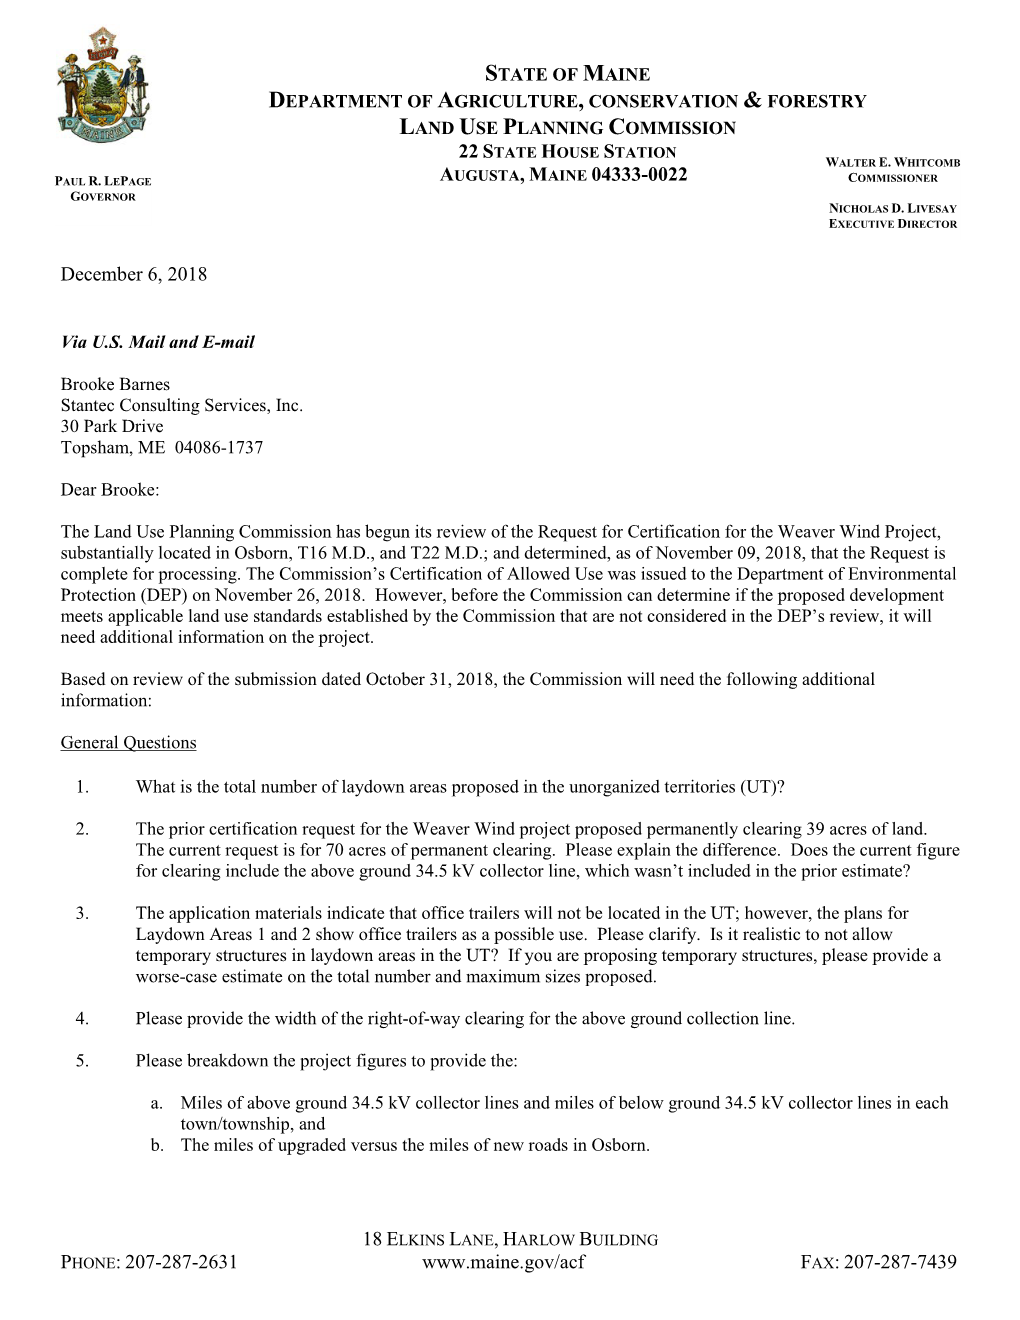 LUPC Letter Requesting Additional Information